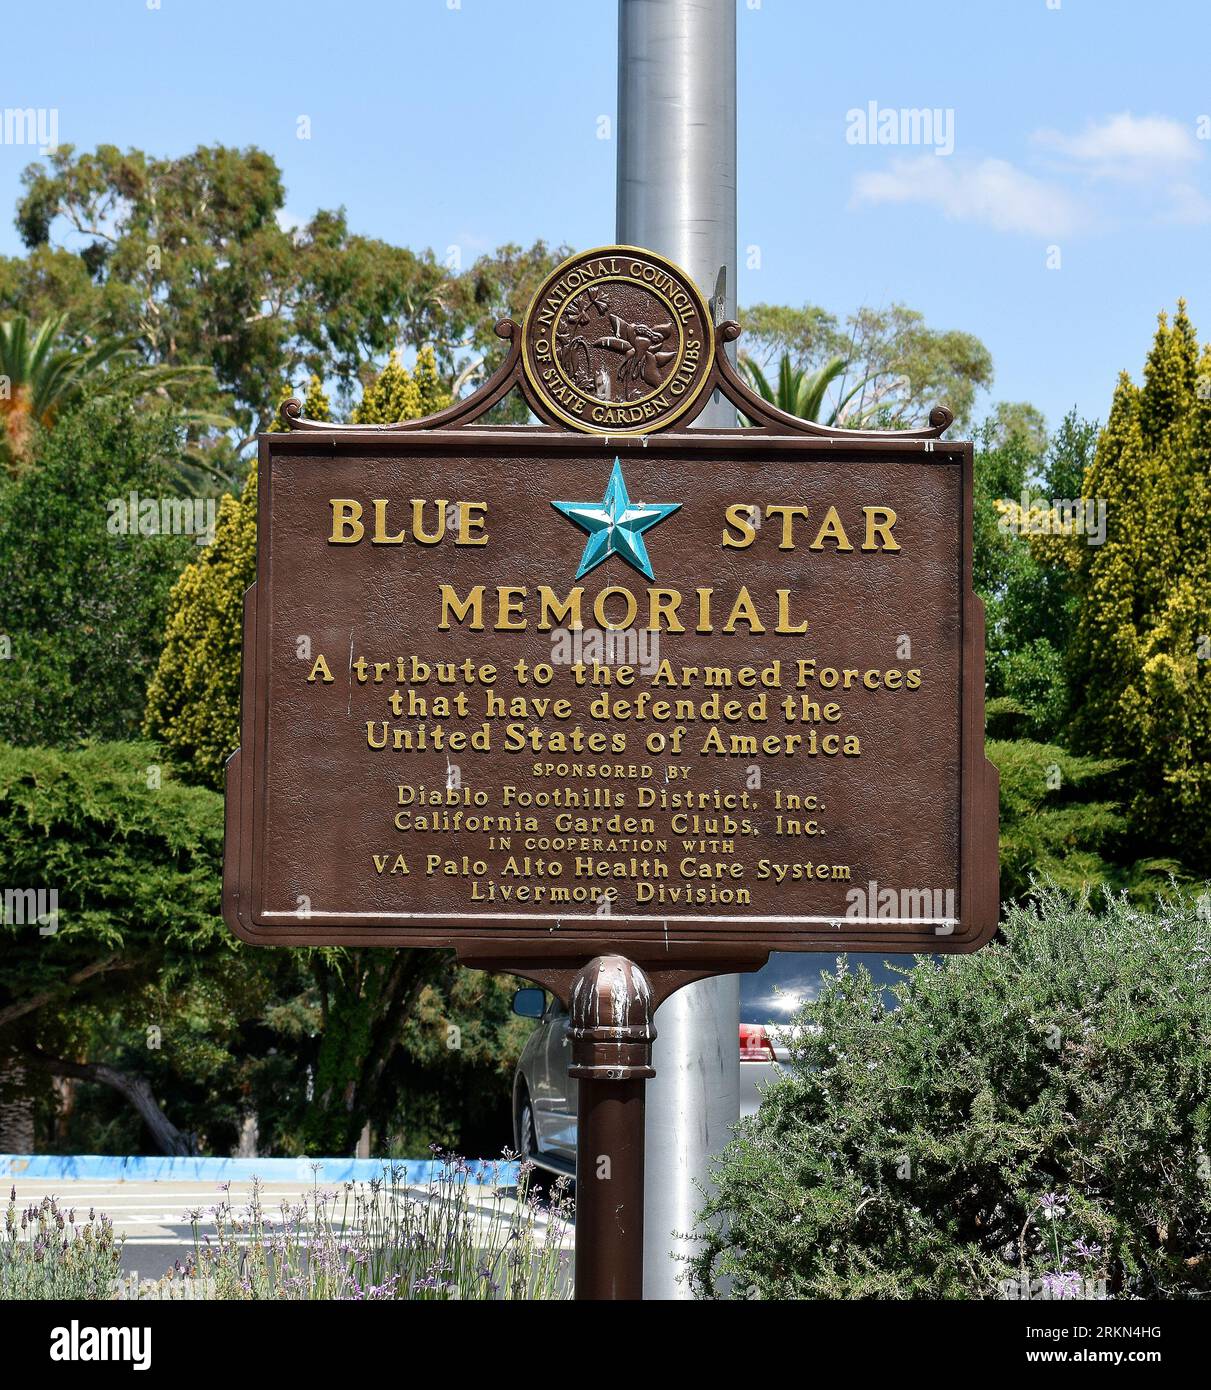 Blue Star Memorial plaque tribute to the Armed Forces, sponsored by Diablo Foothills District  and the California Garden Clubs in front of the Veterans Administration's Hospital  in Livermore, California Stock Photo